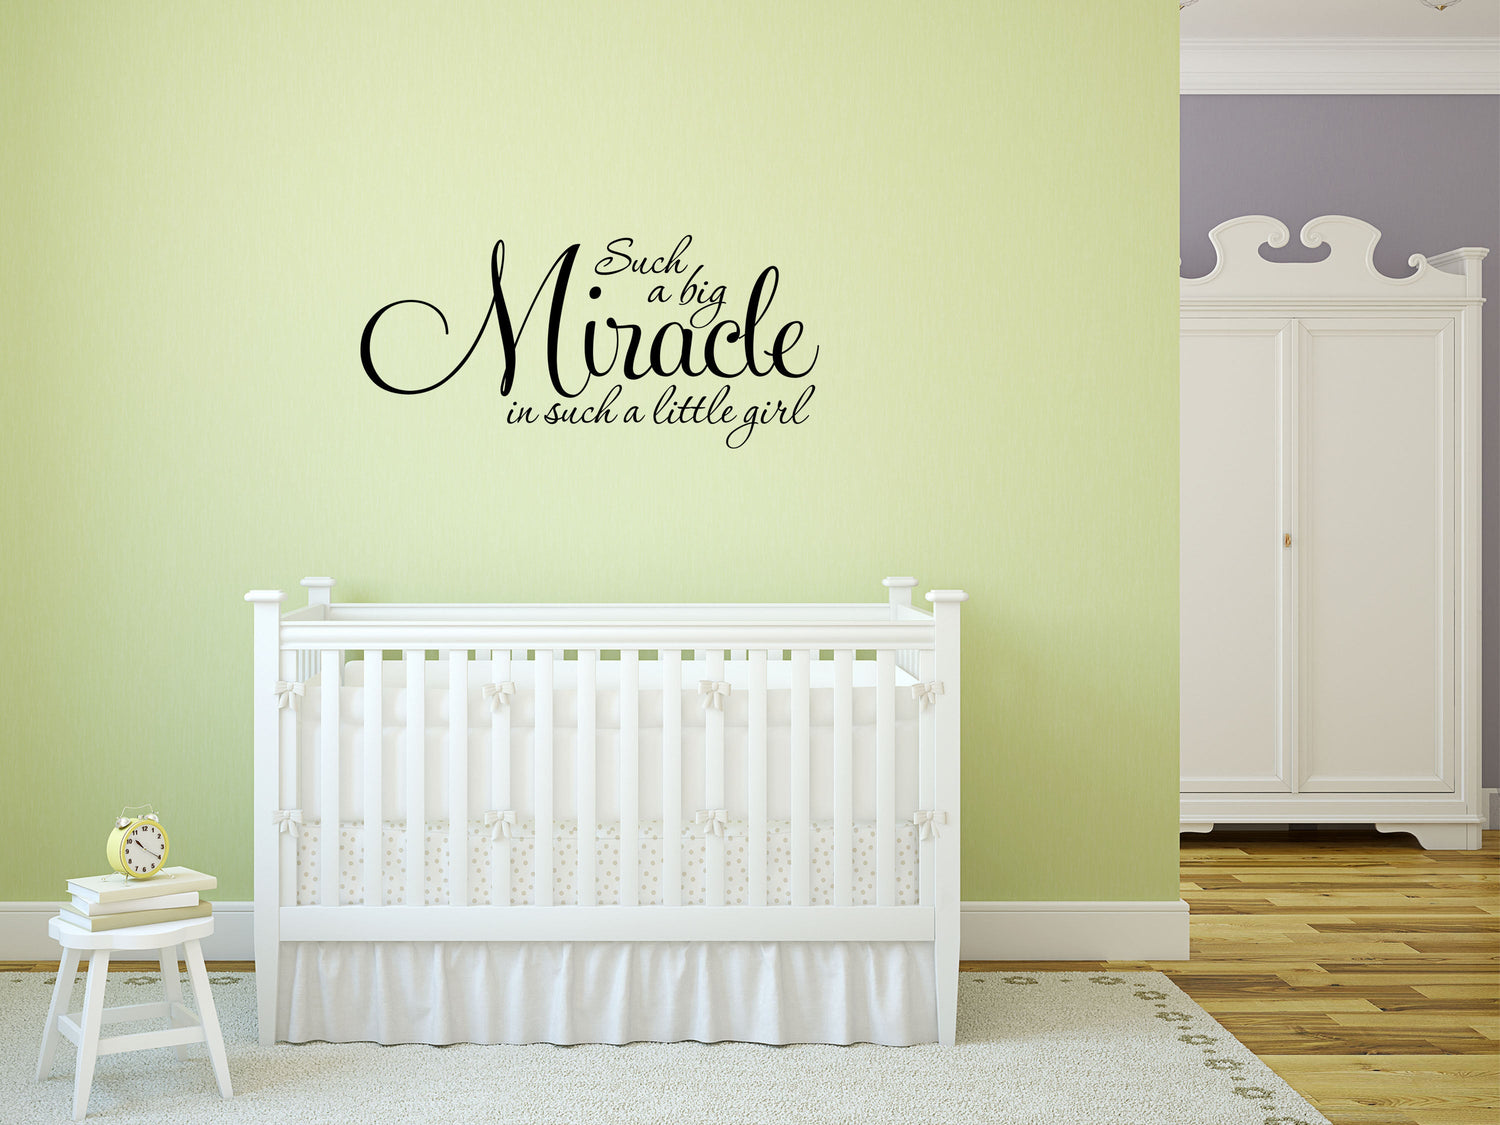 Twin Nursery - Inspirational Wall Signs Vinyl Wall Decal Done 